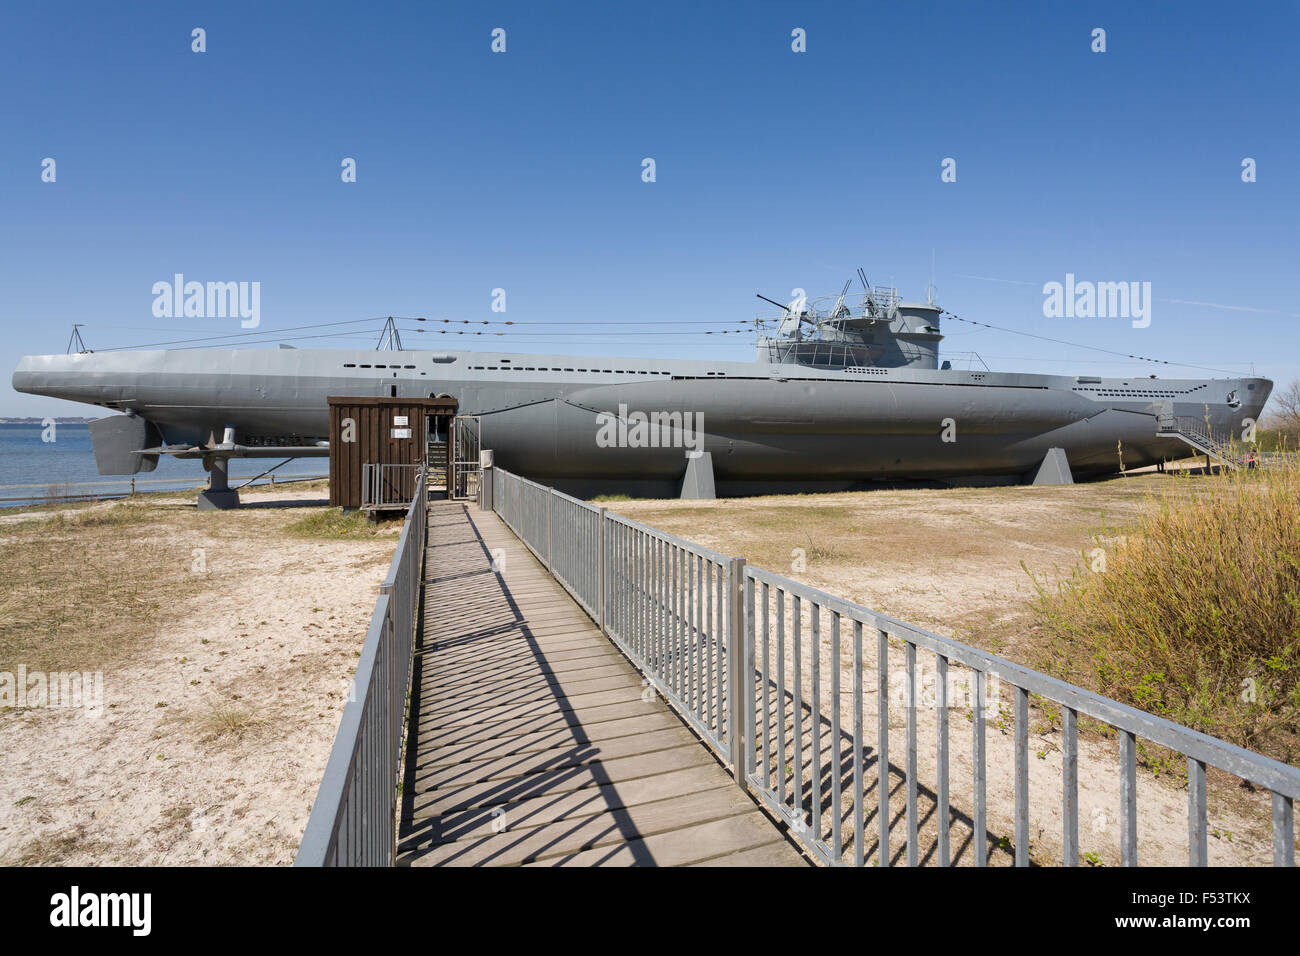 19.04.2015, Laboe, Schleswig-Holstein, Germany - The submarine U 995 as a museum ship at the foot of the Naval Monument in Laboe. U 995 is a method used in World War II German U-boat type VII C / 41 of the former Navy. It was put into service in September 1943 and completed nine patrols. After the war, U 995 went as a test and training boat KNM Kaura into the possession of the Royal Norwegian Navy. In 1965 the return to Germany, on 2 October 1971, the official handover, and since 13 March 1972 is the submarine as a museum ship at the foot of the Naval Monument in Laboe. Operators of the Techni Stock Photo